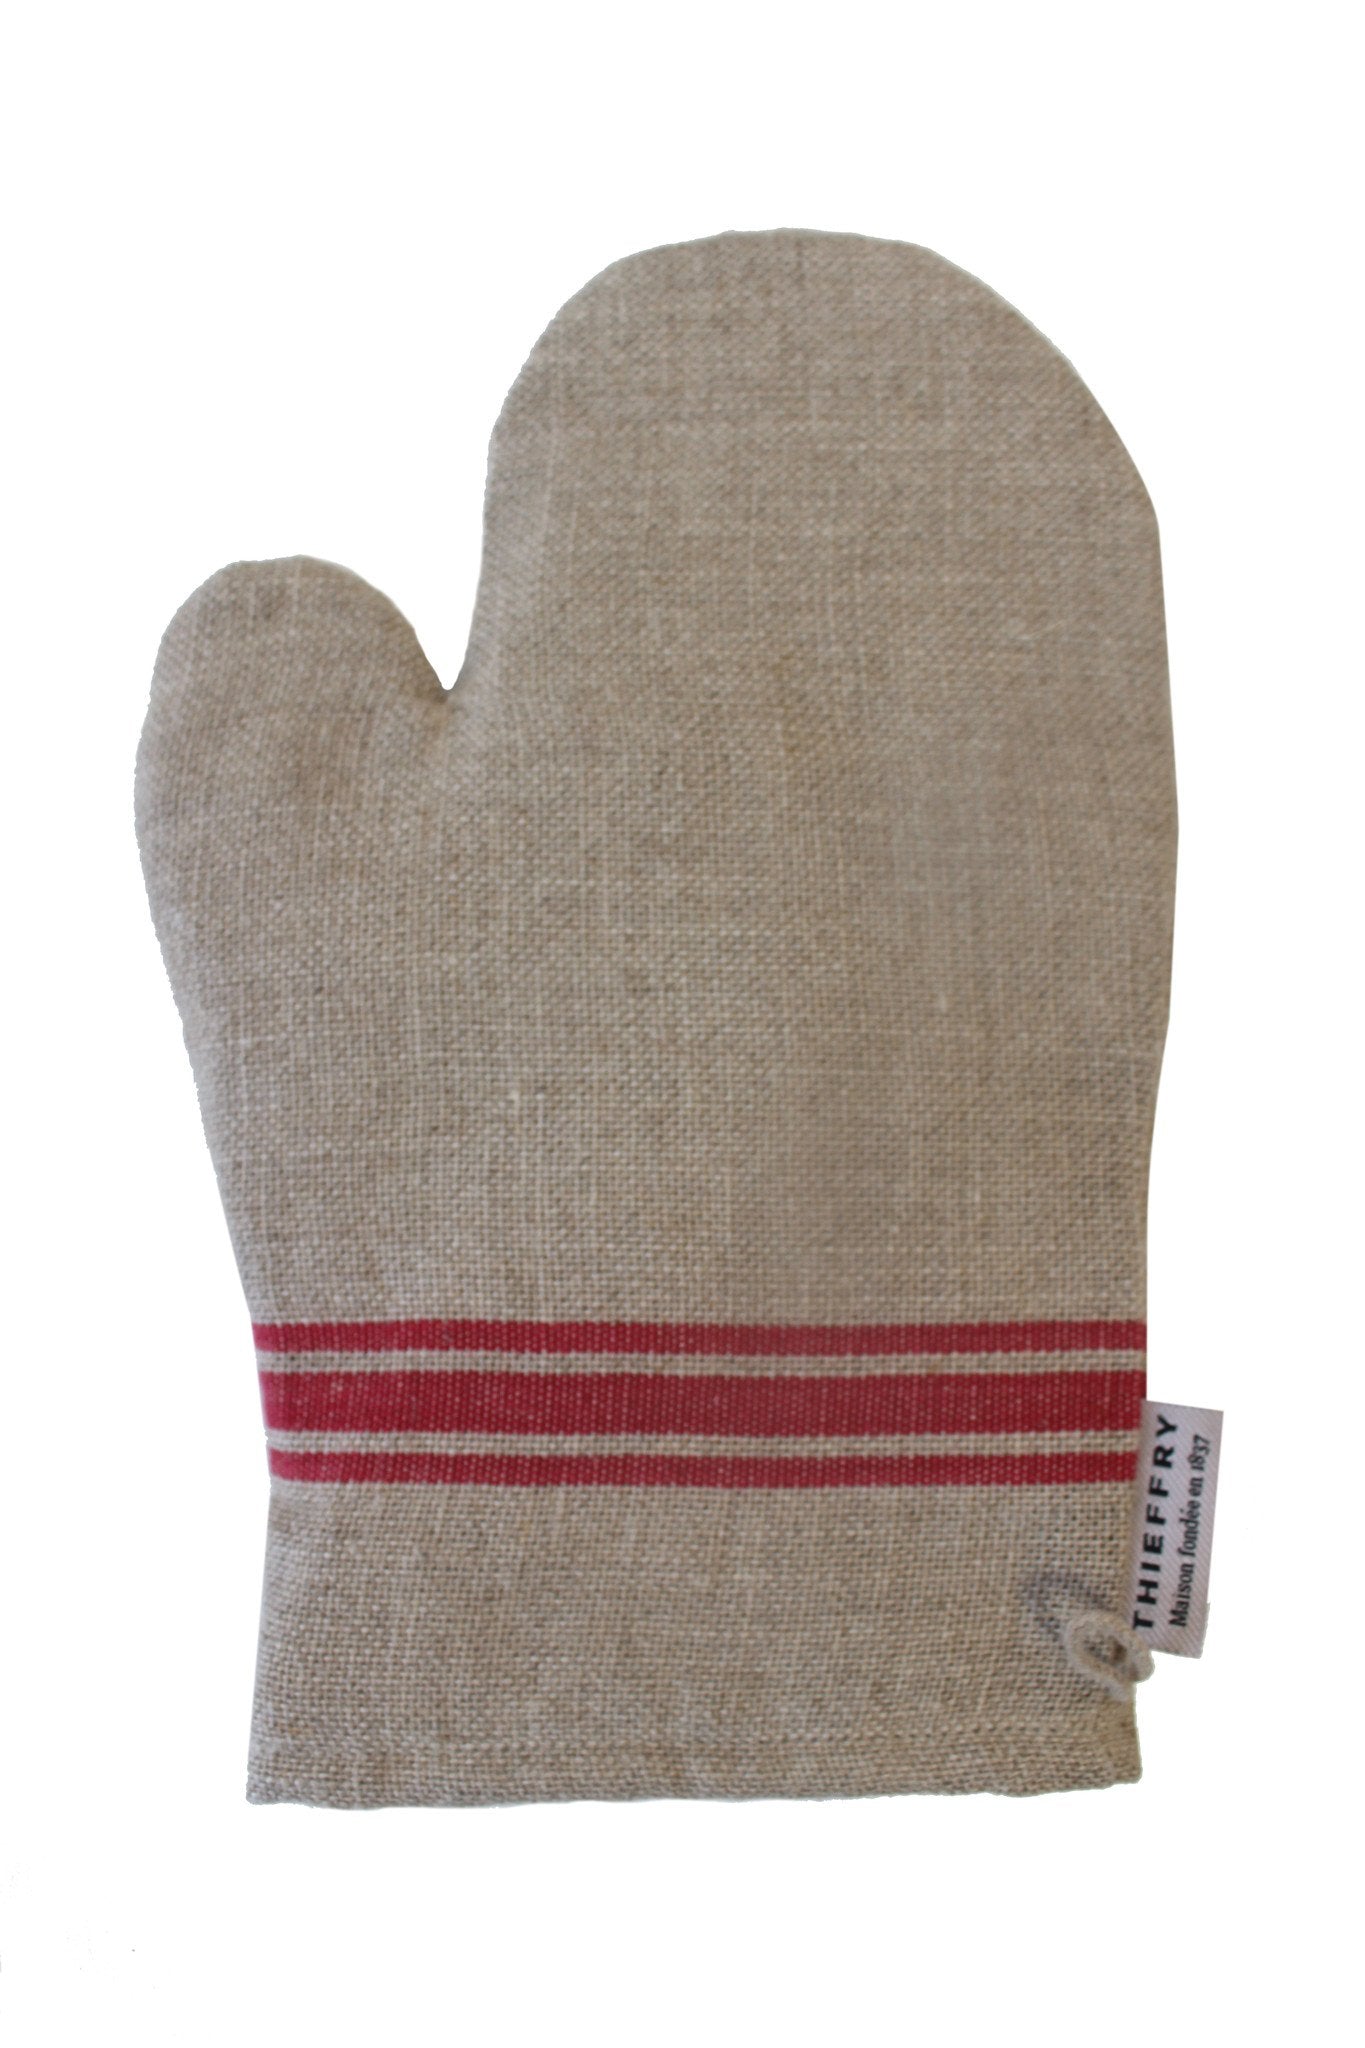 Thieffry Red Monogramme Linen Oven Mitt - French Dry Goods